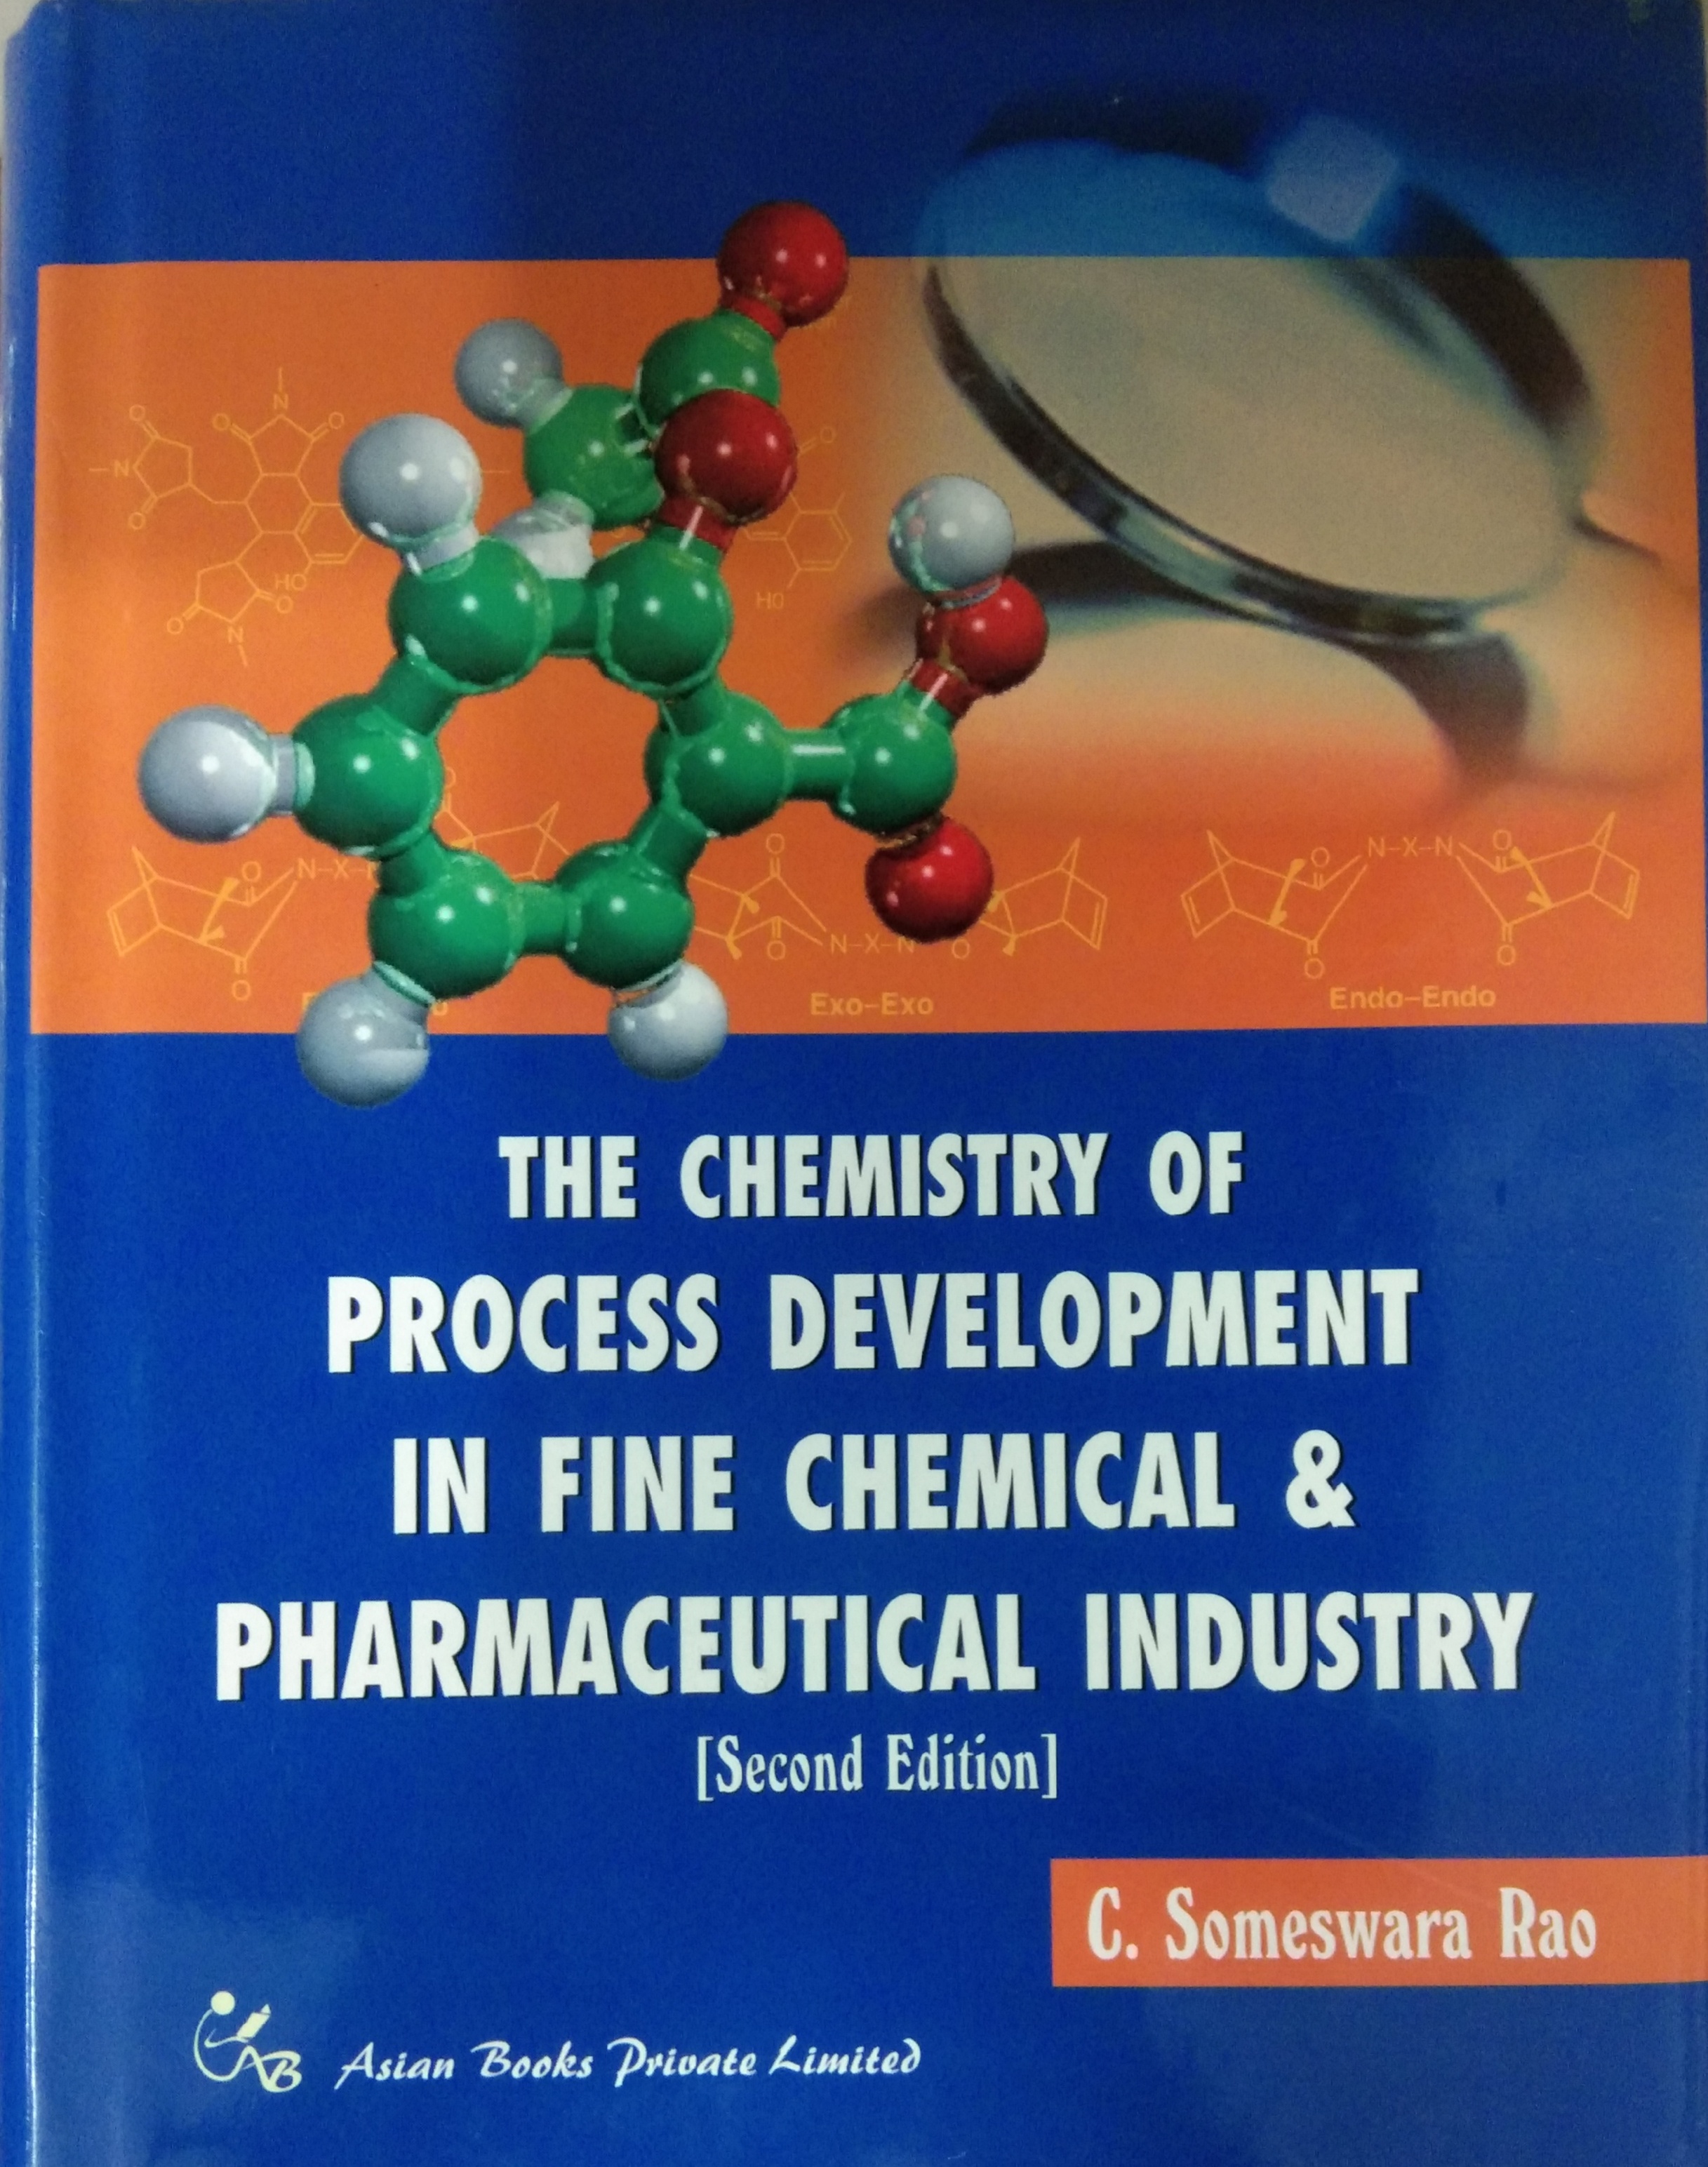 basic-sciences/pharmacology/the-chemistry-of-process-development-in-fine-chemical-pharmaceutical-industry-2-ed--9788186299777